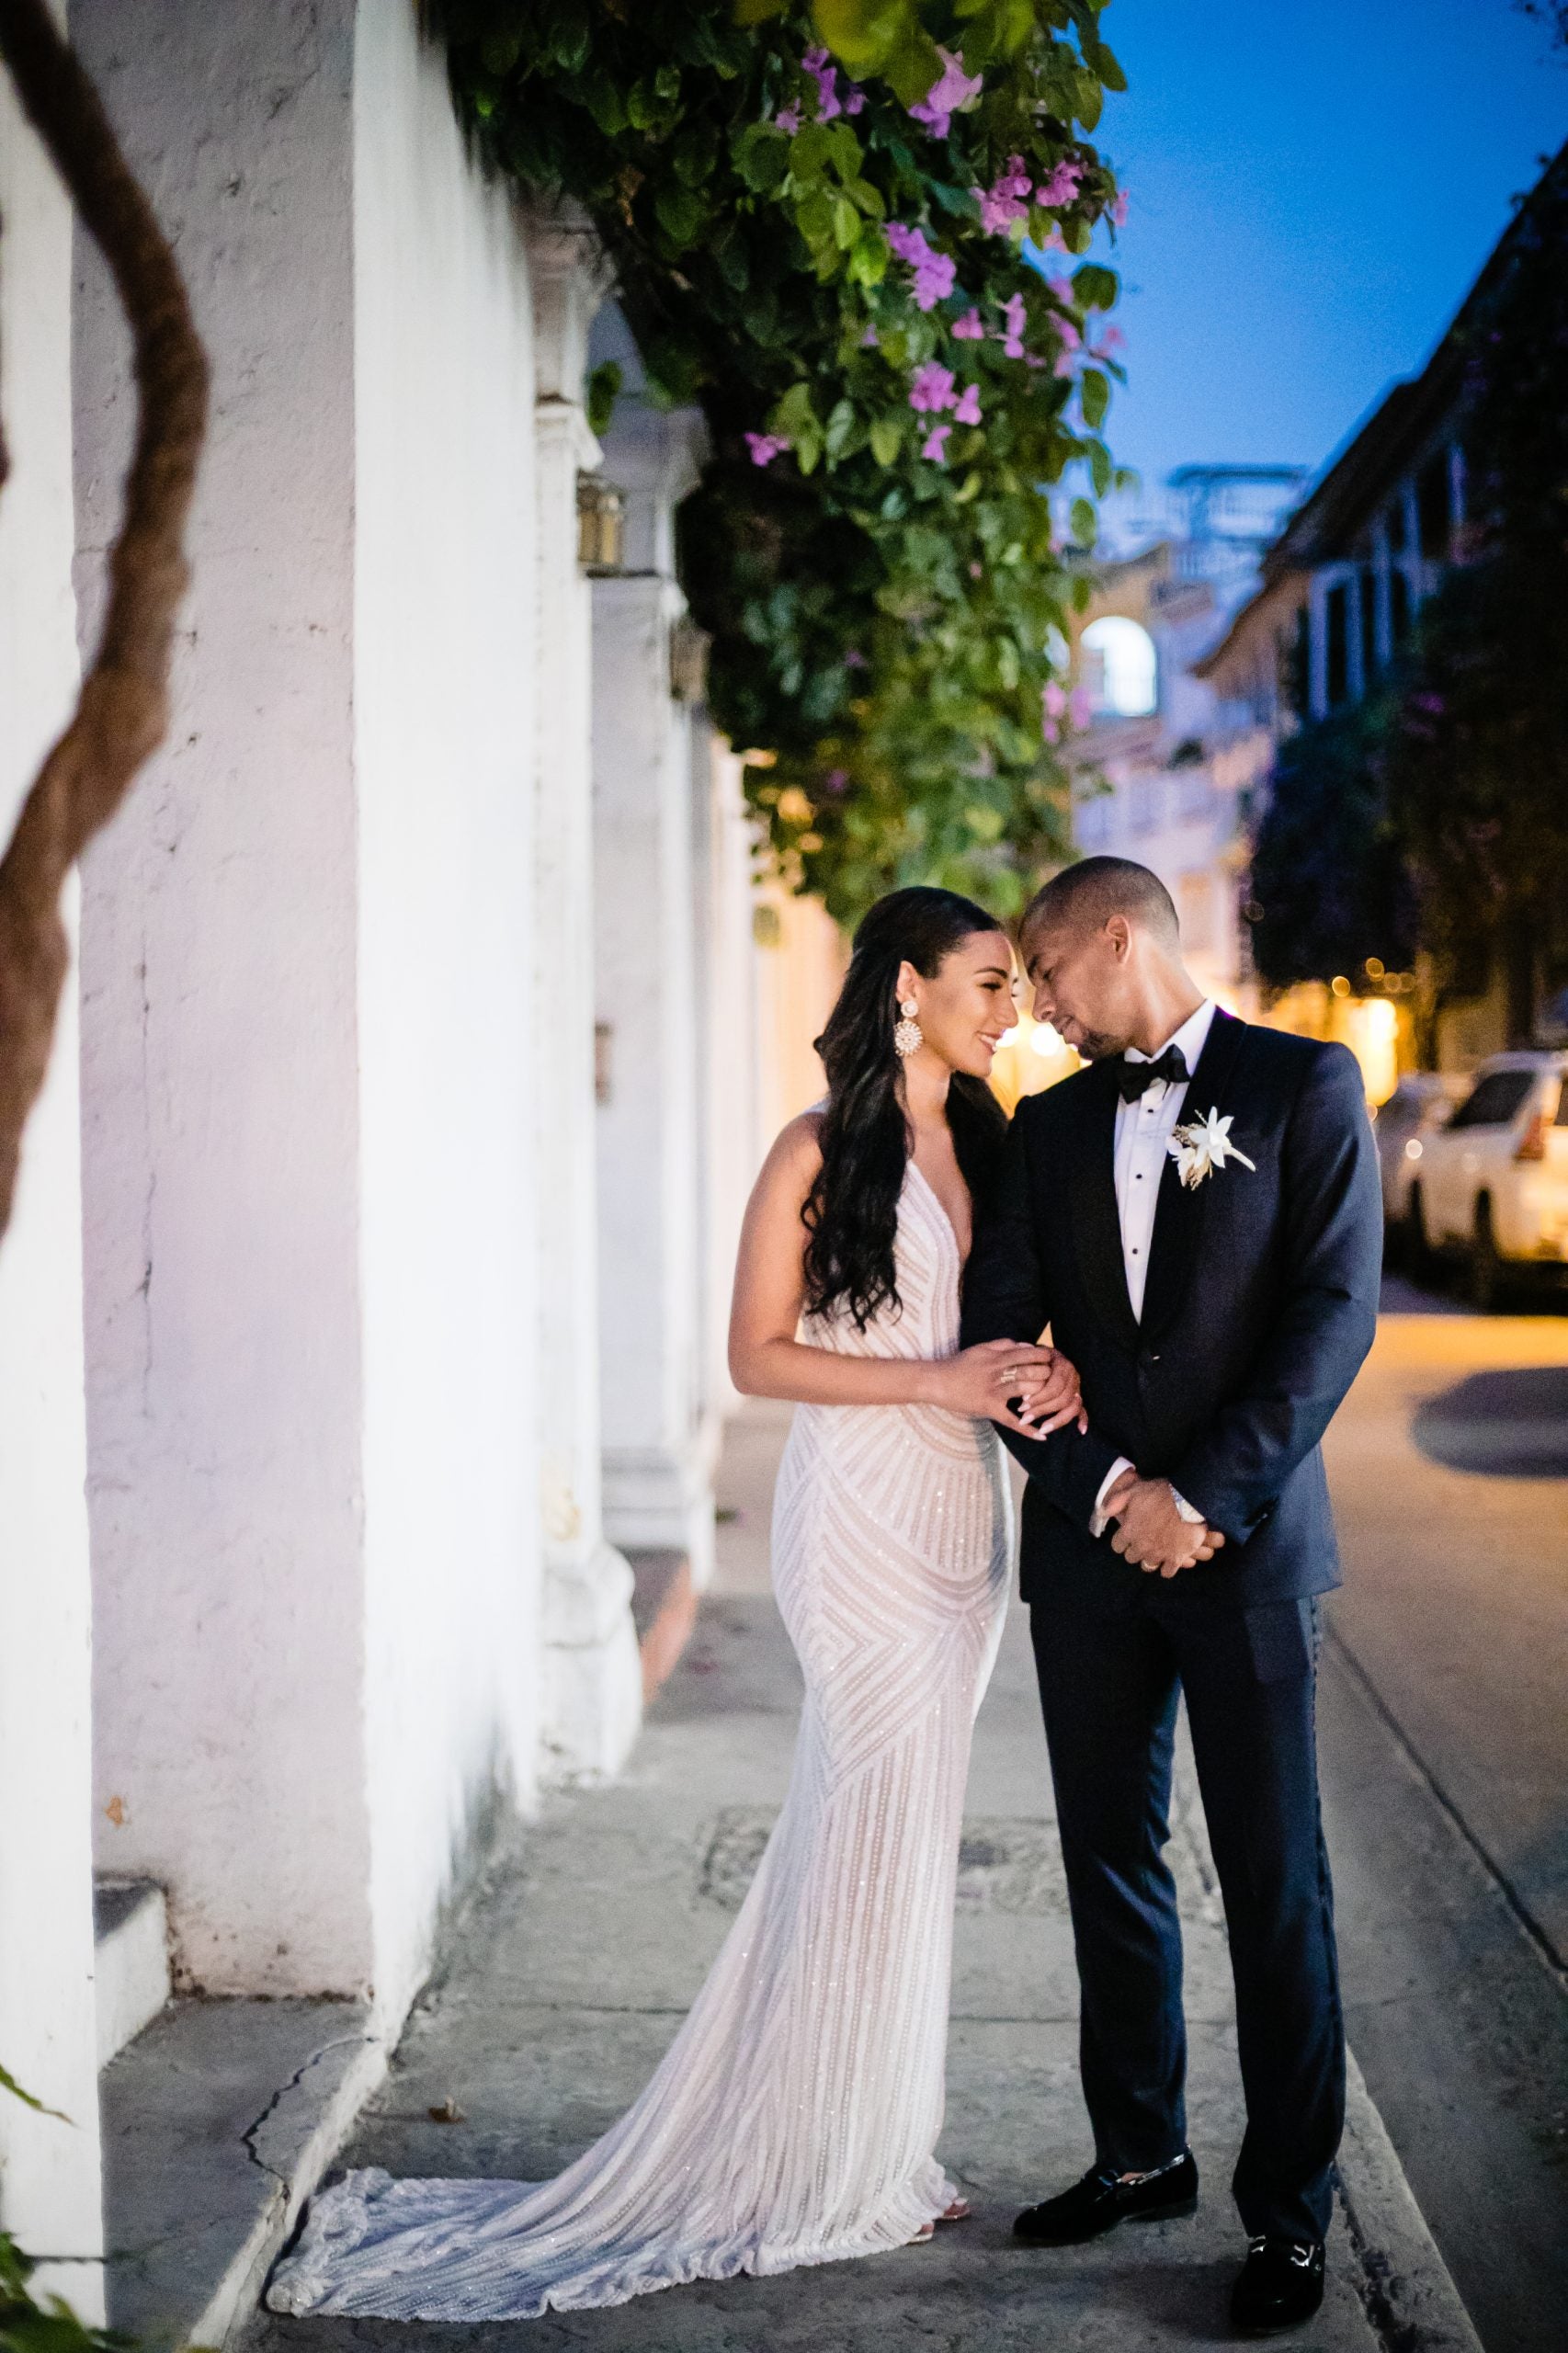 Bridal Bliss: NBC News NOW Anchor Morgan Radford Wed David Williams In A Stunning Celebration In Colombia